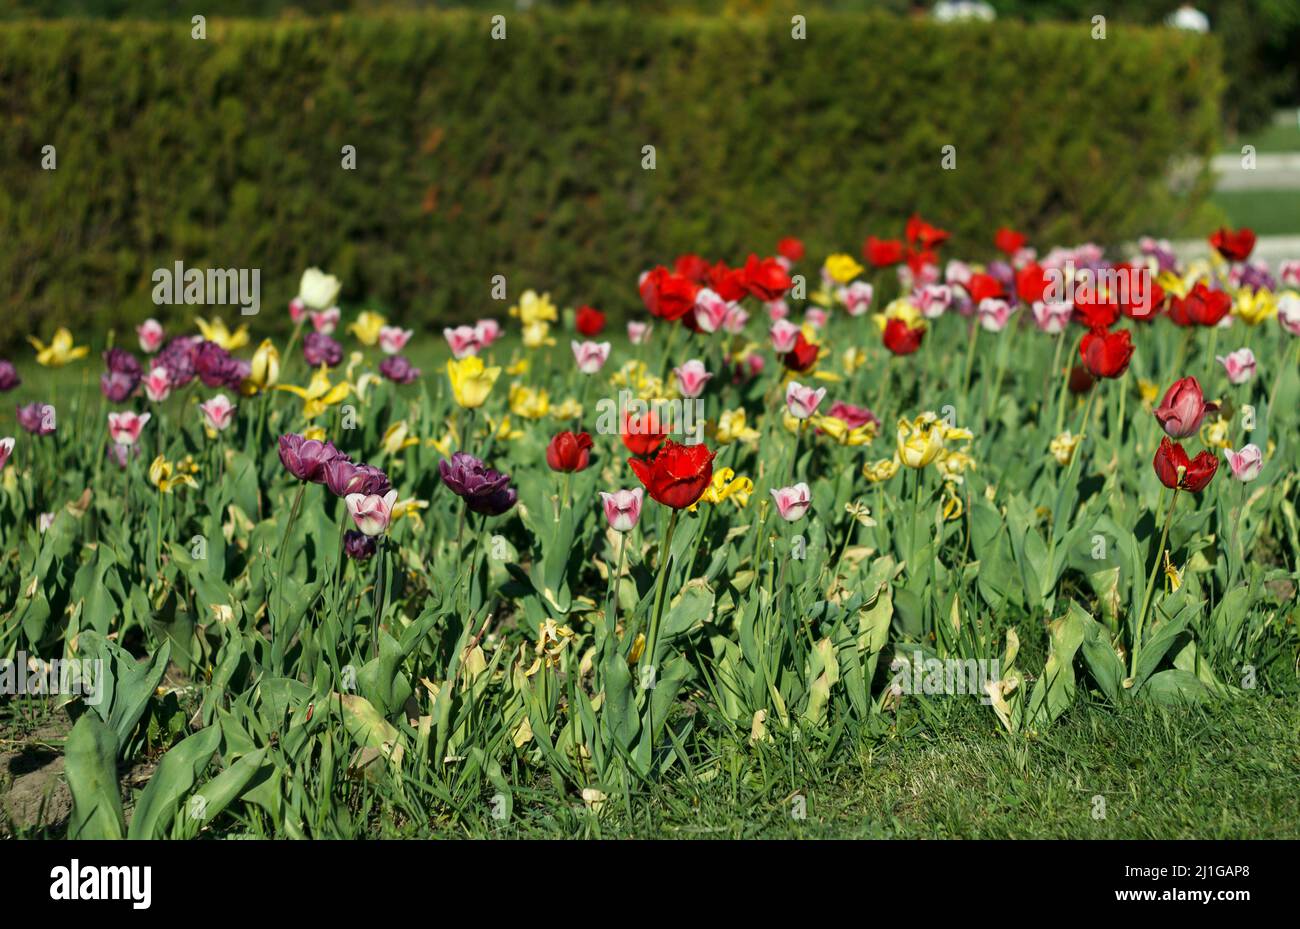 Landscape of multi-colored flowering tulips in spring garden against the backdrop of topiari yew Stock Photo